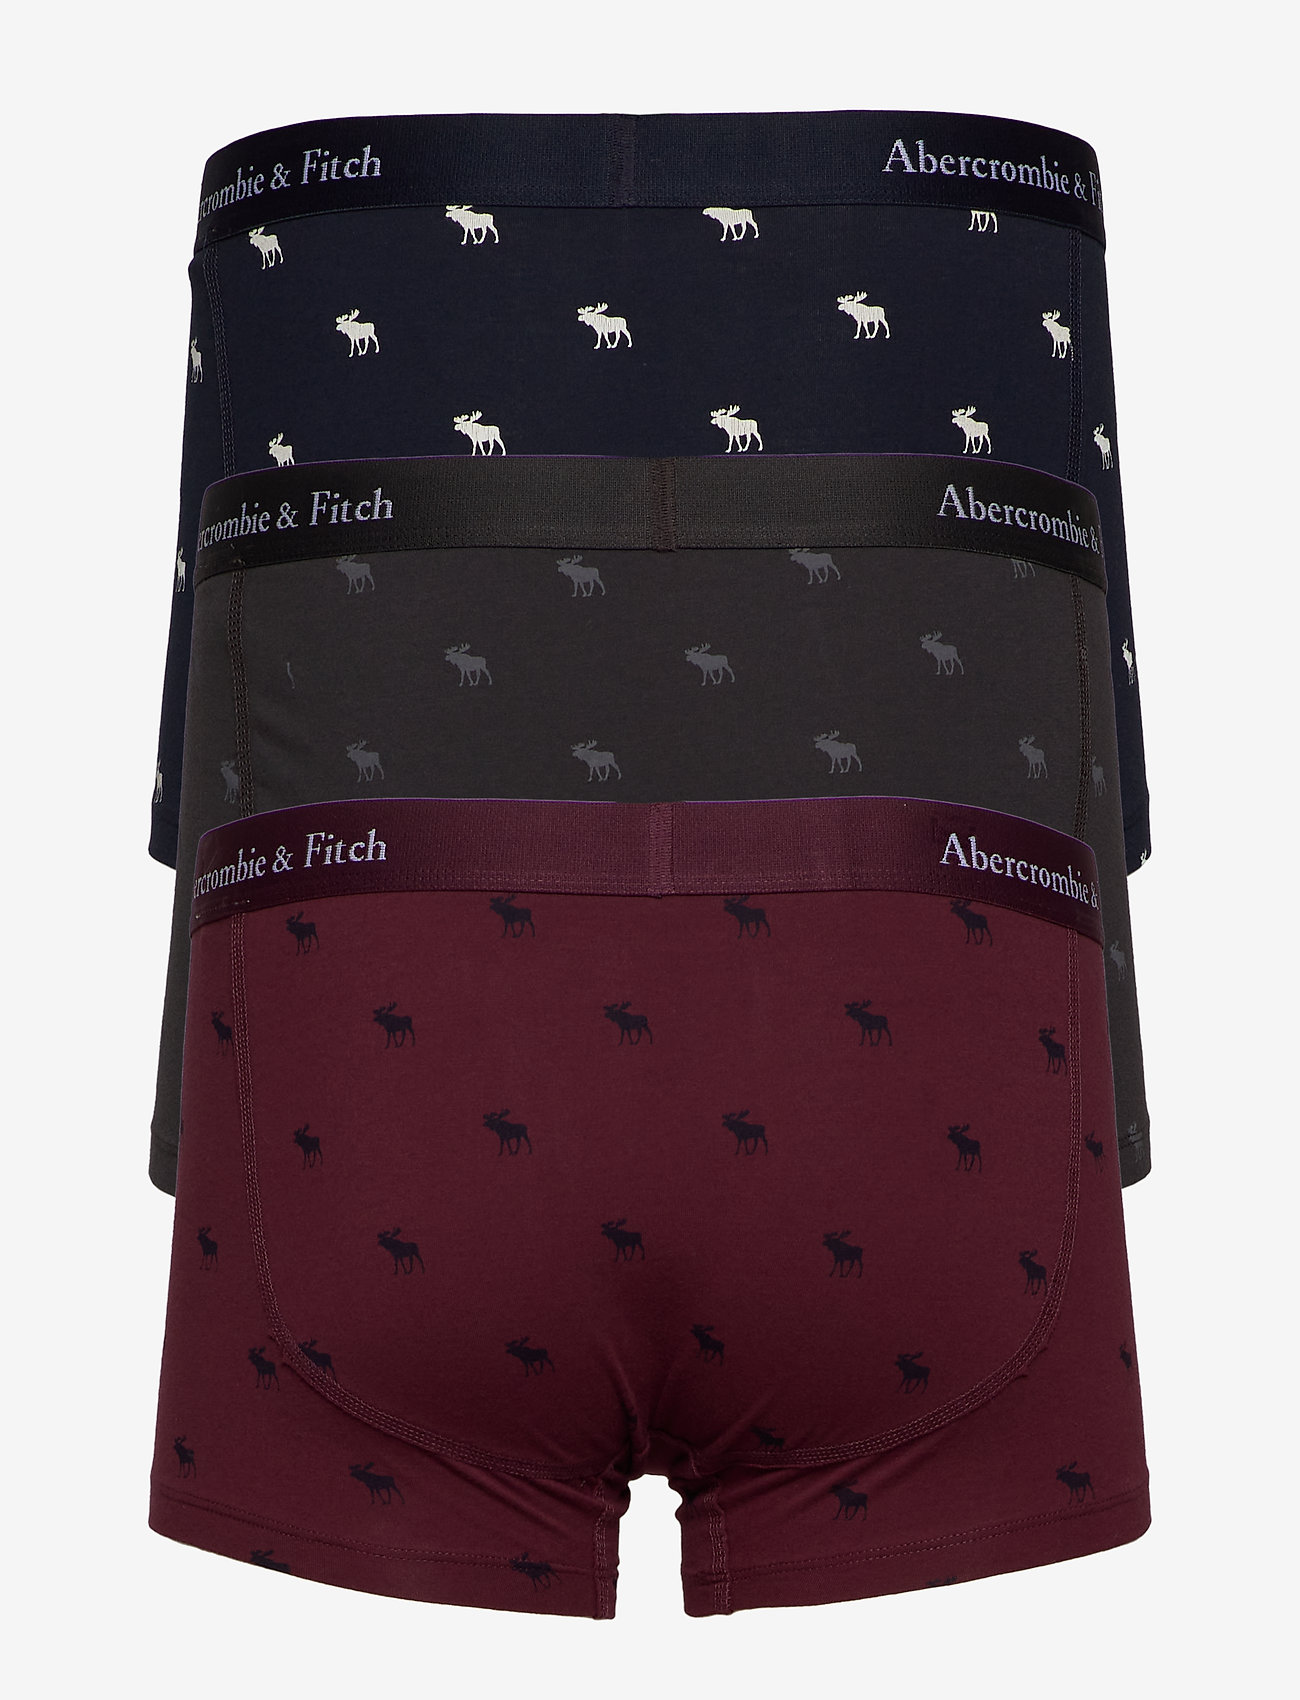 abercrombie fitch boxers